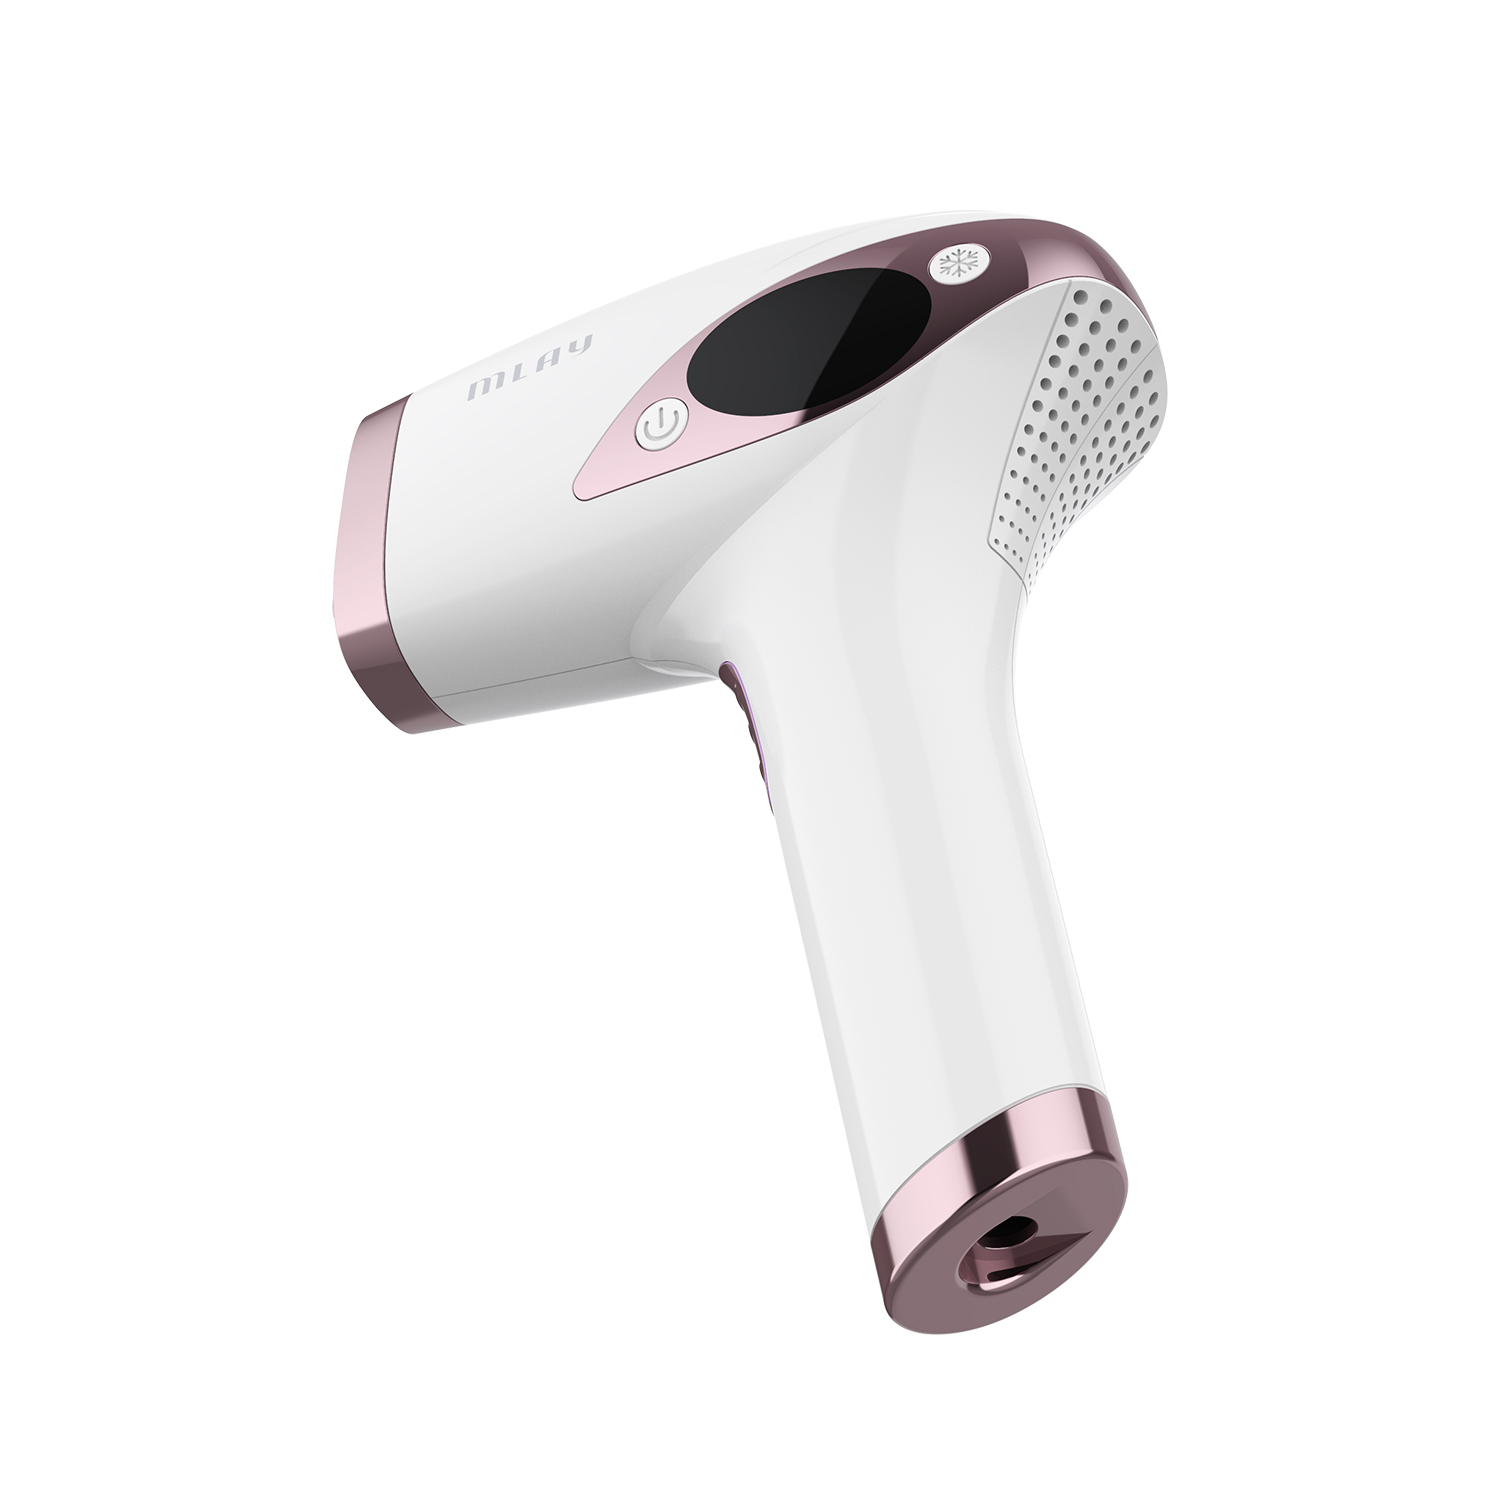 Oem Ice Cooling Ipl Hair Removal Instrument Logo Mini Home Use Laser 5 Levels Ipl Hair Removal 500000 Flashes